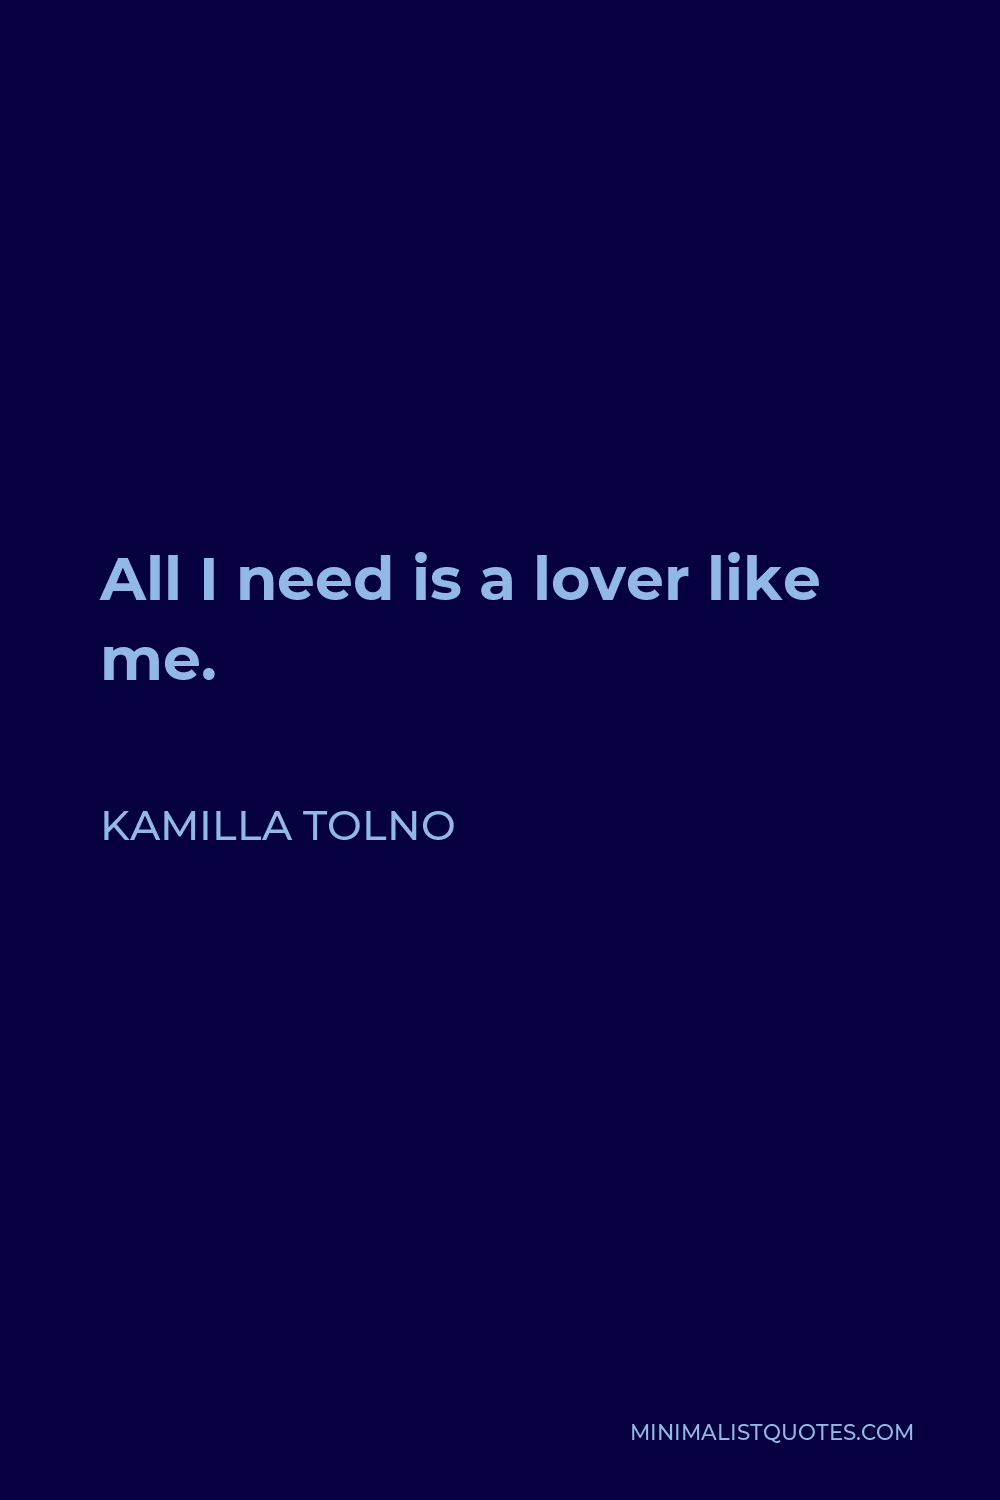 Kamilla Tolno Quote - All I need is a lover like me.